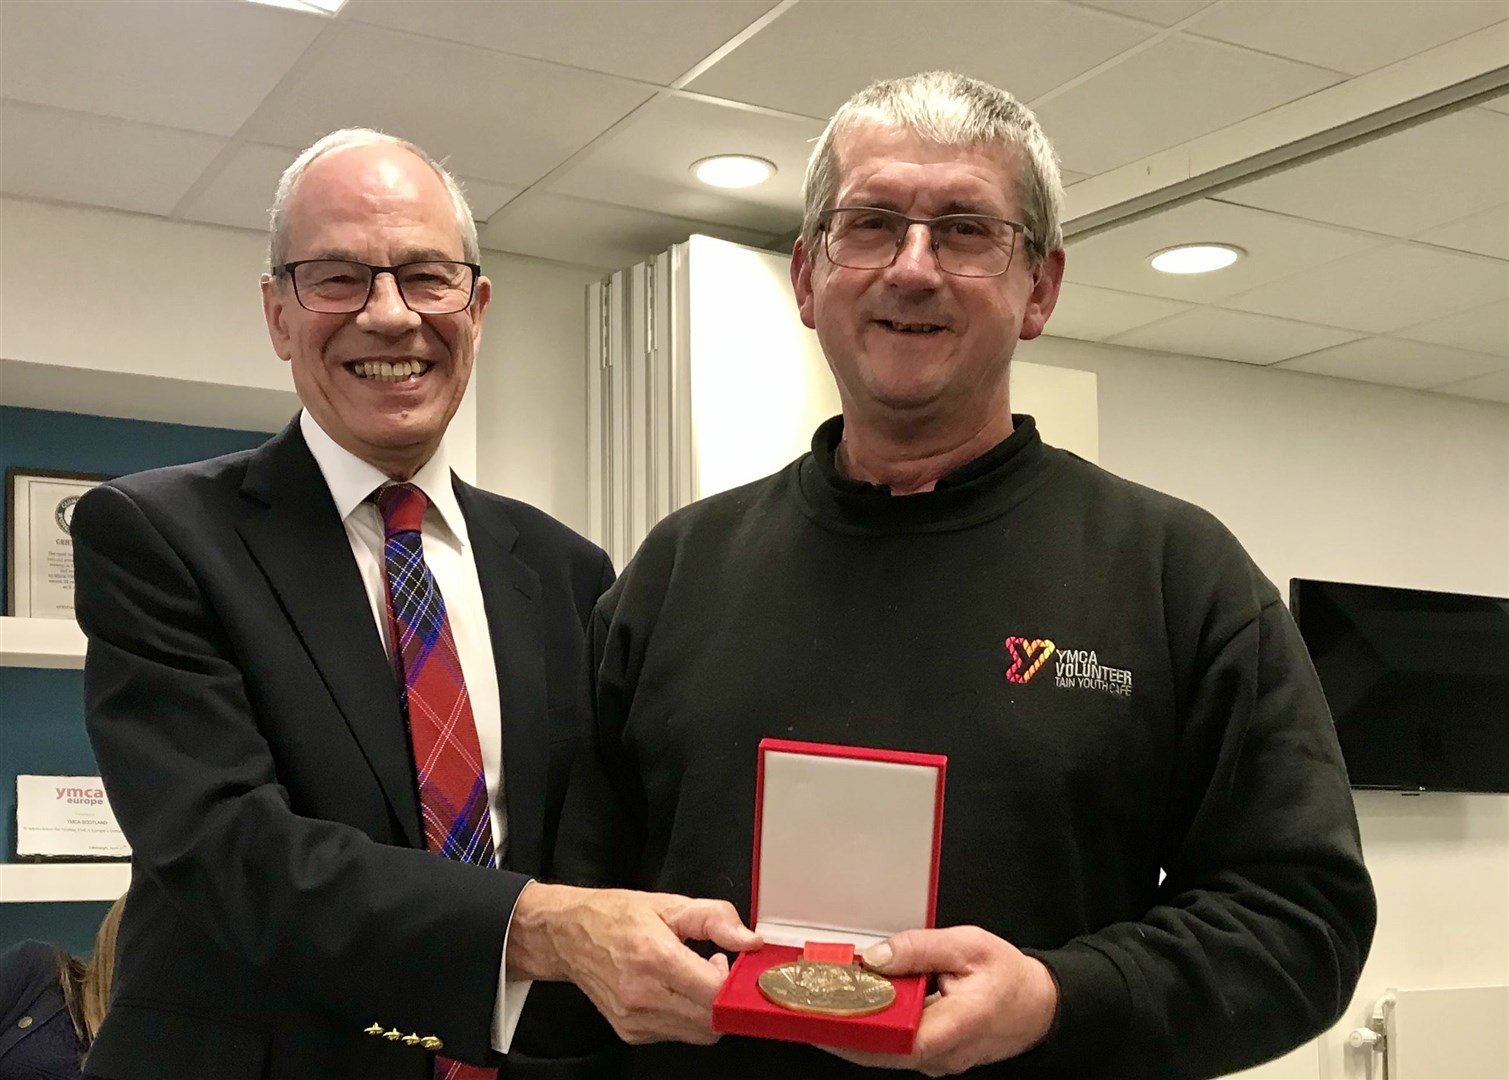 Peter Berry with John Naylor the outgoing President of YMCA Scotland who presented Peter with his award.